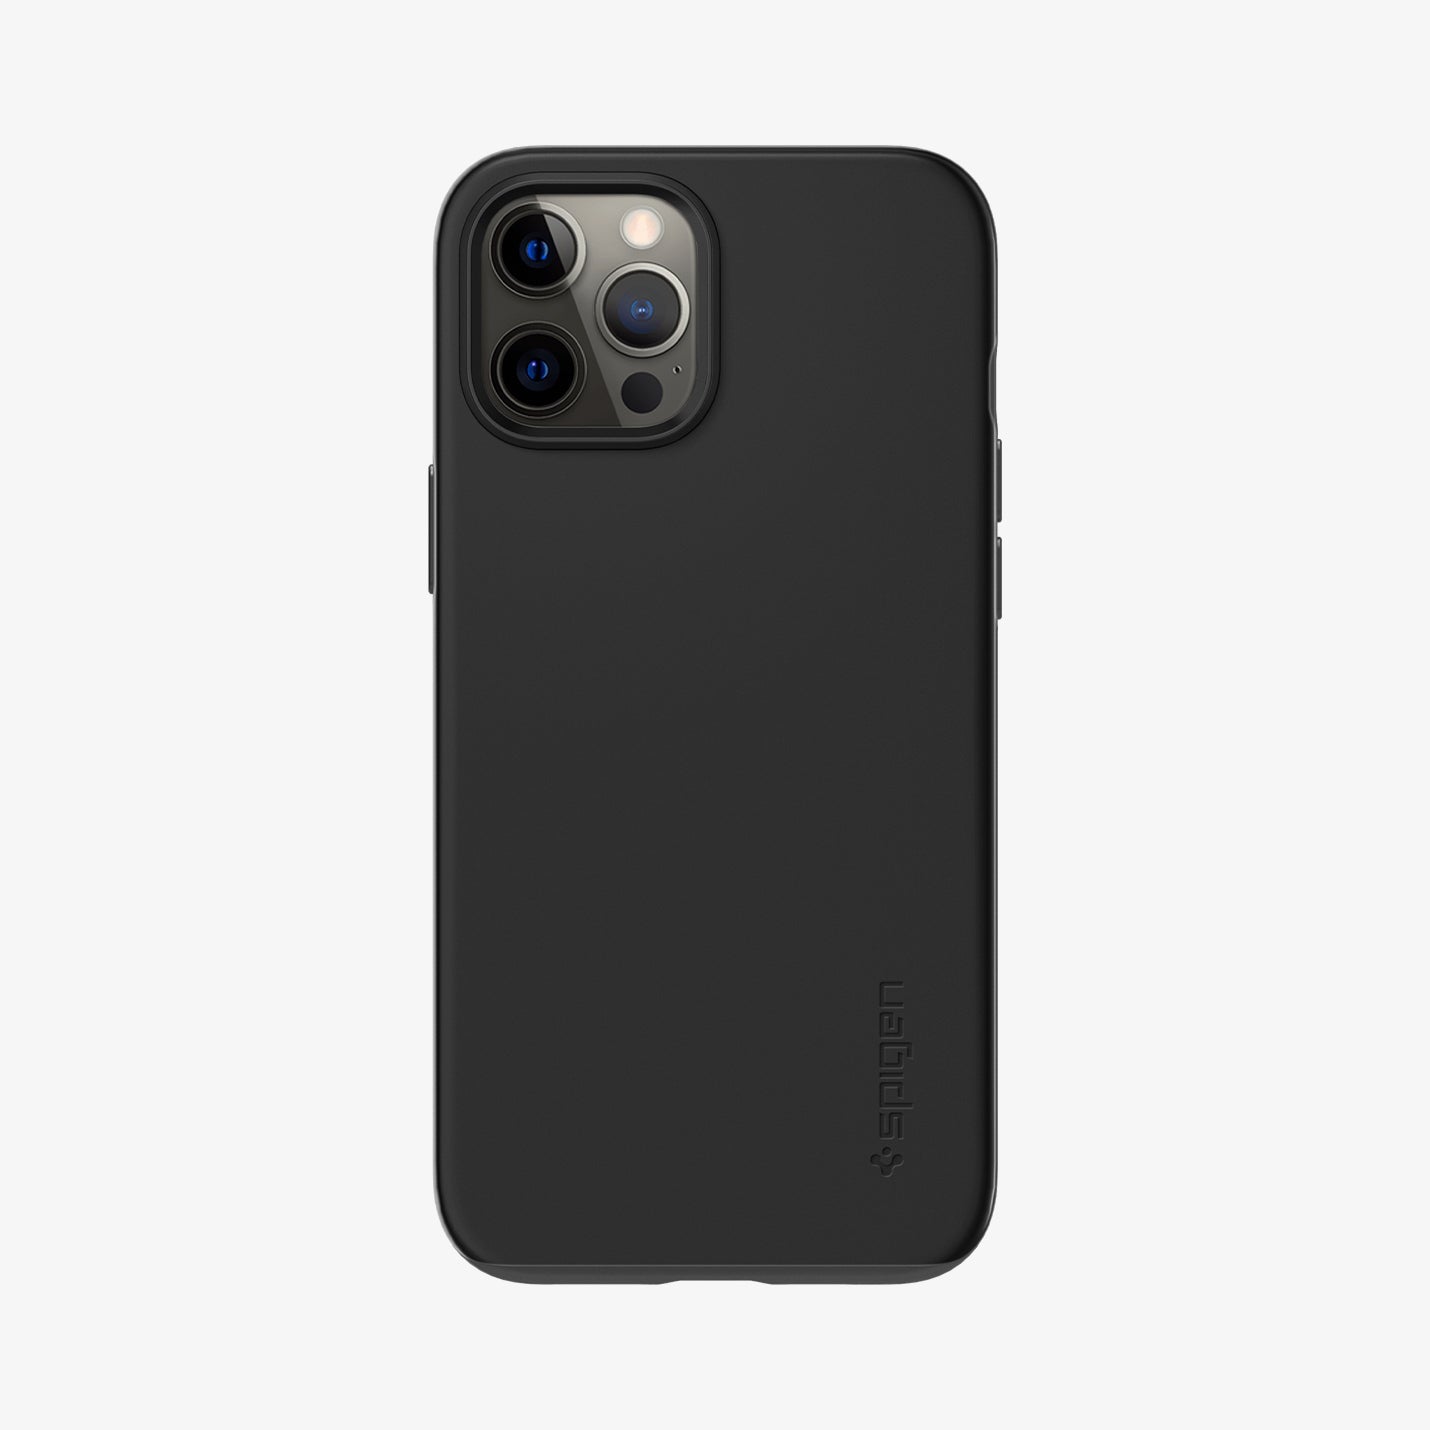 ACS01612 - iPhone 12 Pro Max Case Thin Fit in black showing the back